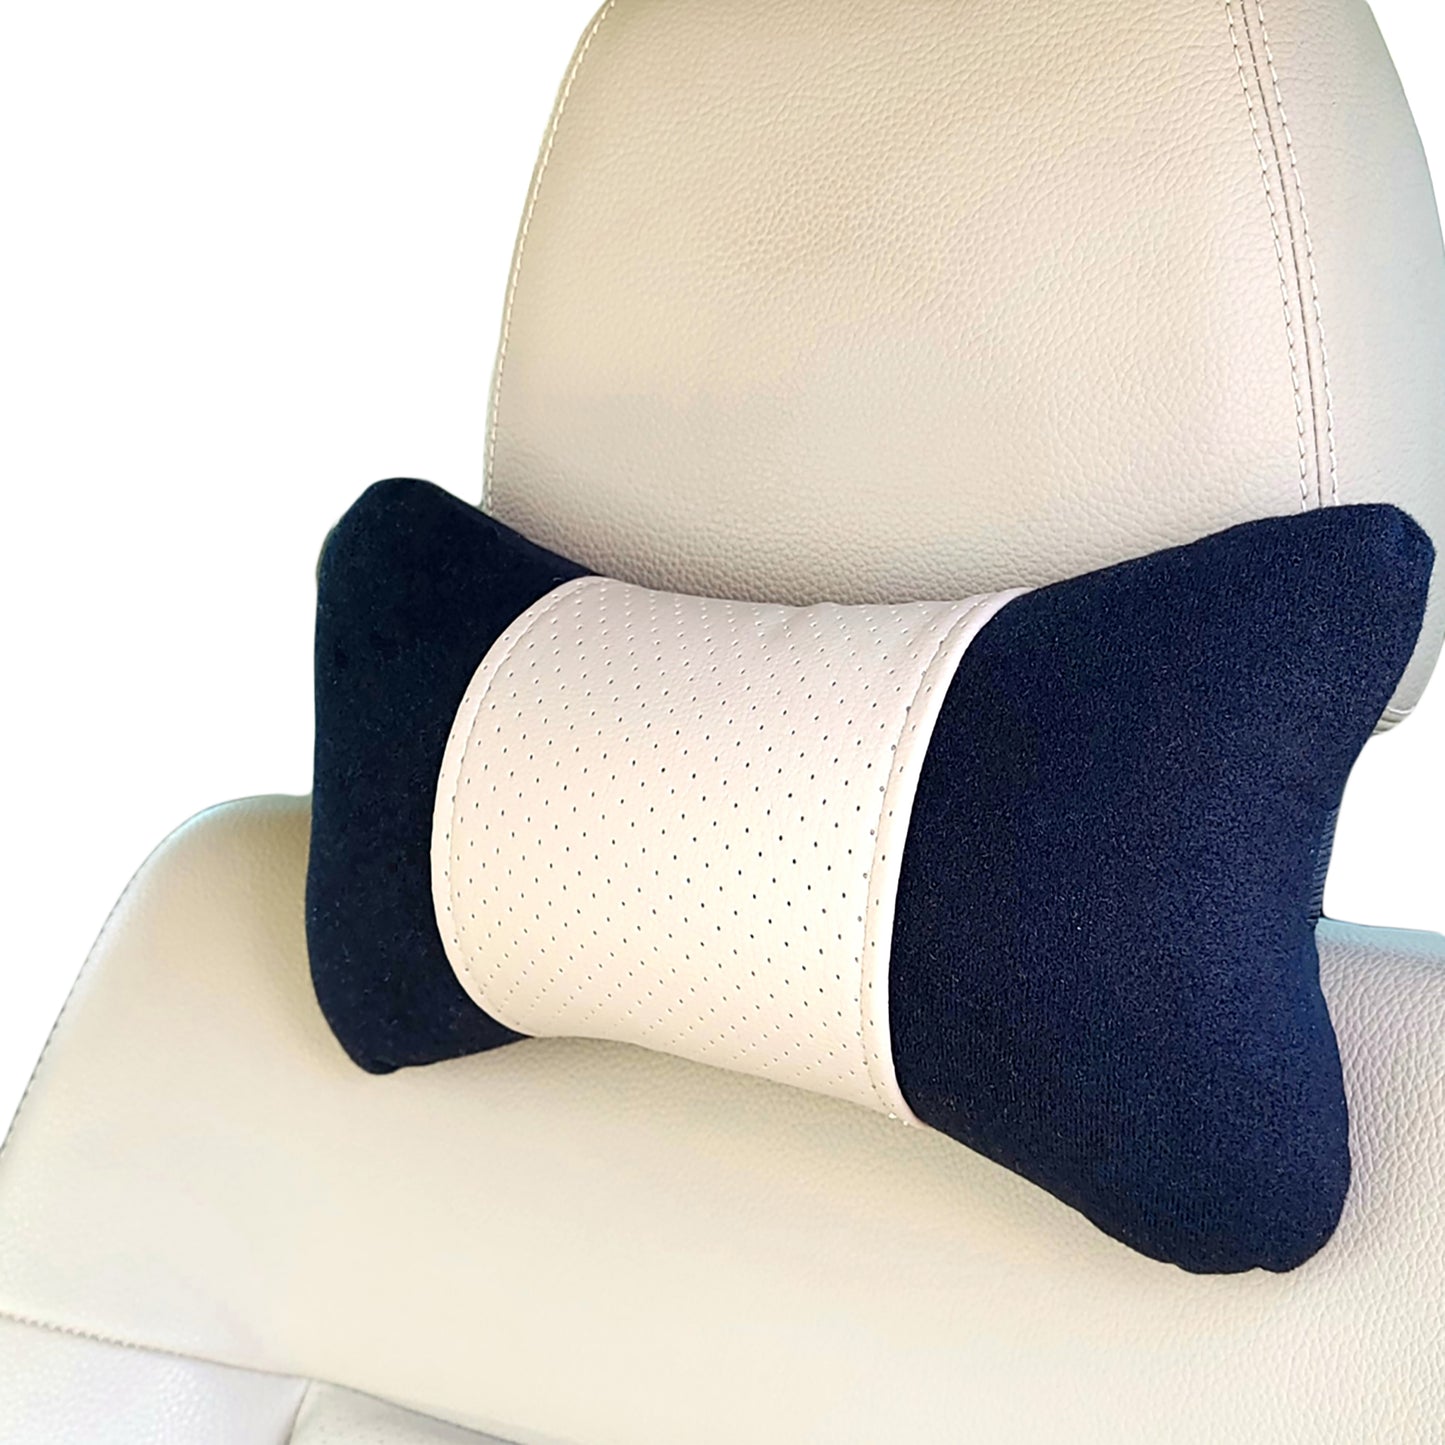 Ultimate Comfort and Neck Pain Relief Yupbizauto Car Seat Neck Pillow Cushion with Washable Interchangeable Pattern Pad and Ergonomic Design - Yupbizauto